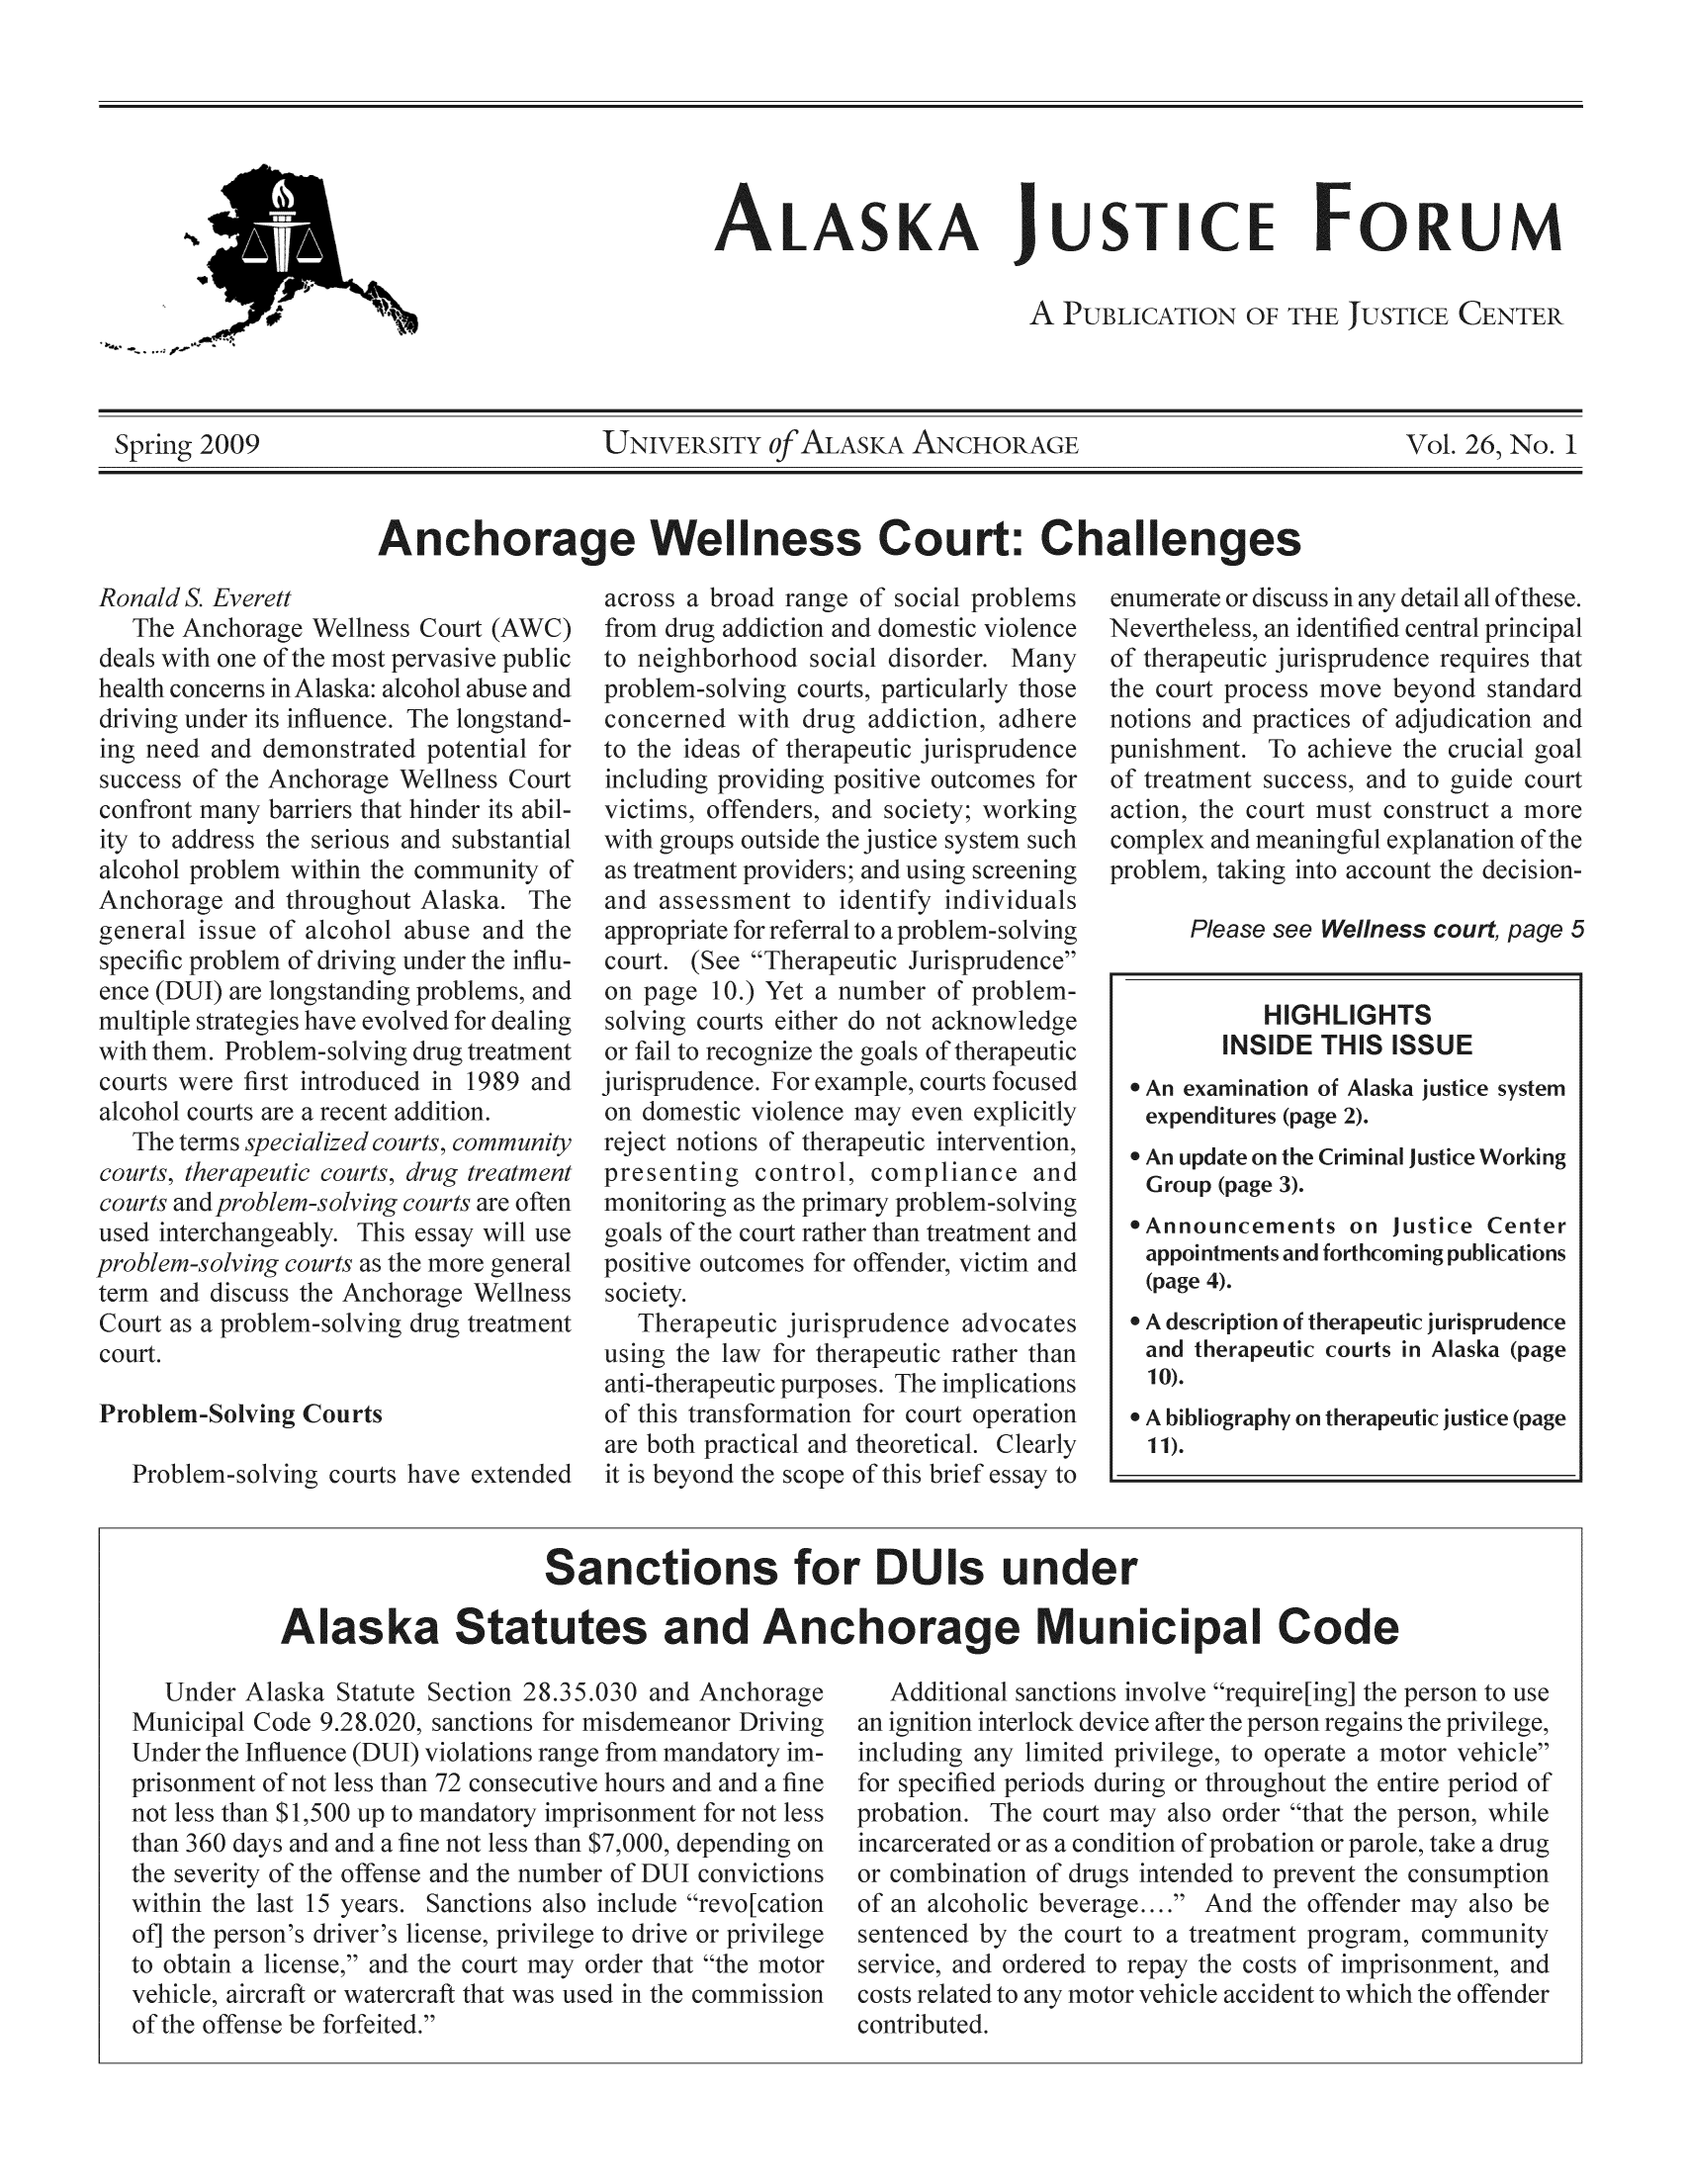 handle is hein.journals/aljufor26 and id is 1 raw text is: ALASKA JUSTICE FORUM

PUBLI

fE JUSTICE CI

UNIVERSITY0fALASKAANCHORAGE
Anchorage Wellness Court: Challenges
across a broad range of social problems enumerate ordiscu

abuse and pi

potential fc

)f therapc

prts, p

pr(
ff

ape
poc

spr

tic jurisprude
woess move
practices of

for   of

specific problem of
ence (DUI) are long
multiple strategies h

1989

appropr

t provic
;ment t
Sfor refe

ispn
)f pf

goals of therapc
aple, courts foc

spr

Wellness cout

HIGHLIGHTS
INSIDE THIS ISSUE

xaminat

daska

svst

urt

ial justice Wc

u.roup (page 3).
,Announcements on just
appointments and forthcomini

thera[

Problem-Solving Courts

$1,500 up

apeutc purposes.
ransformation fo
practical and th(
)nd the scope of

Sanctions for DUIs under
Alaska Statutes and Anchorage Municipal Code

jer AlaSKa Ntatu
ipal Code 9.28.0.
the Influence (Dt

prlsonme
not less tl
than 360,
the sever
within th
of] the pc
to obtain
vehicle,a
- fll,  ,-,f

Af the offense and
st 15 years. San
n's driver's licen
icense, and the (
aft or watercraftI

Sprin

Plth

f the most pc
inAlaska: alc

11 ofpthes
I principc-

)f therap(

L pr

primary pr

for off

ape

spr

ations

raphy on thera

page

after the pc

perods dcri

for spc

1 $7,000, dep

pr

, priviege,
r vehicle
period of

)fpr

offende
progra
of imp

dlaska (pag

idl] tullerd l ;1


